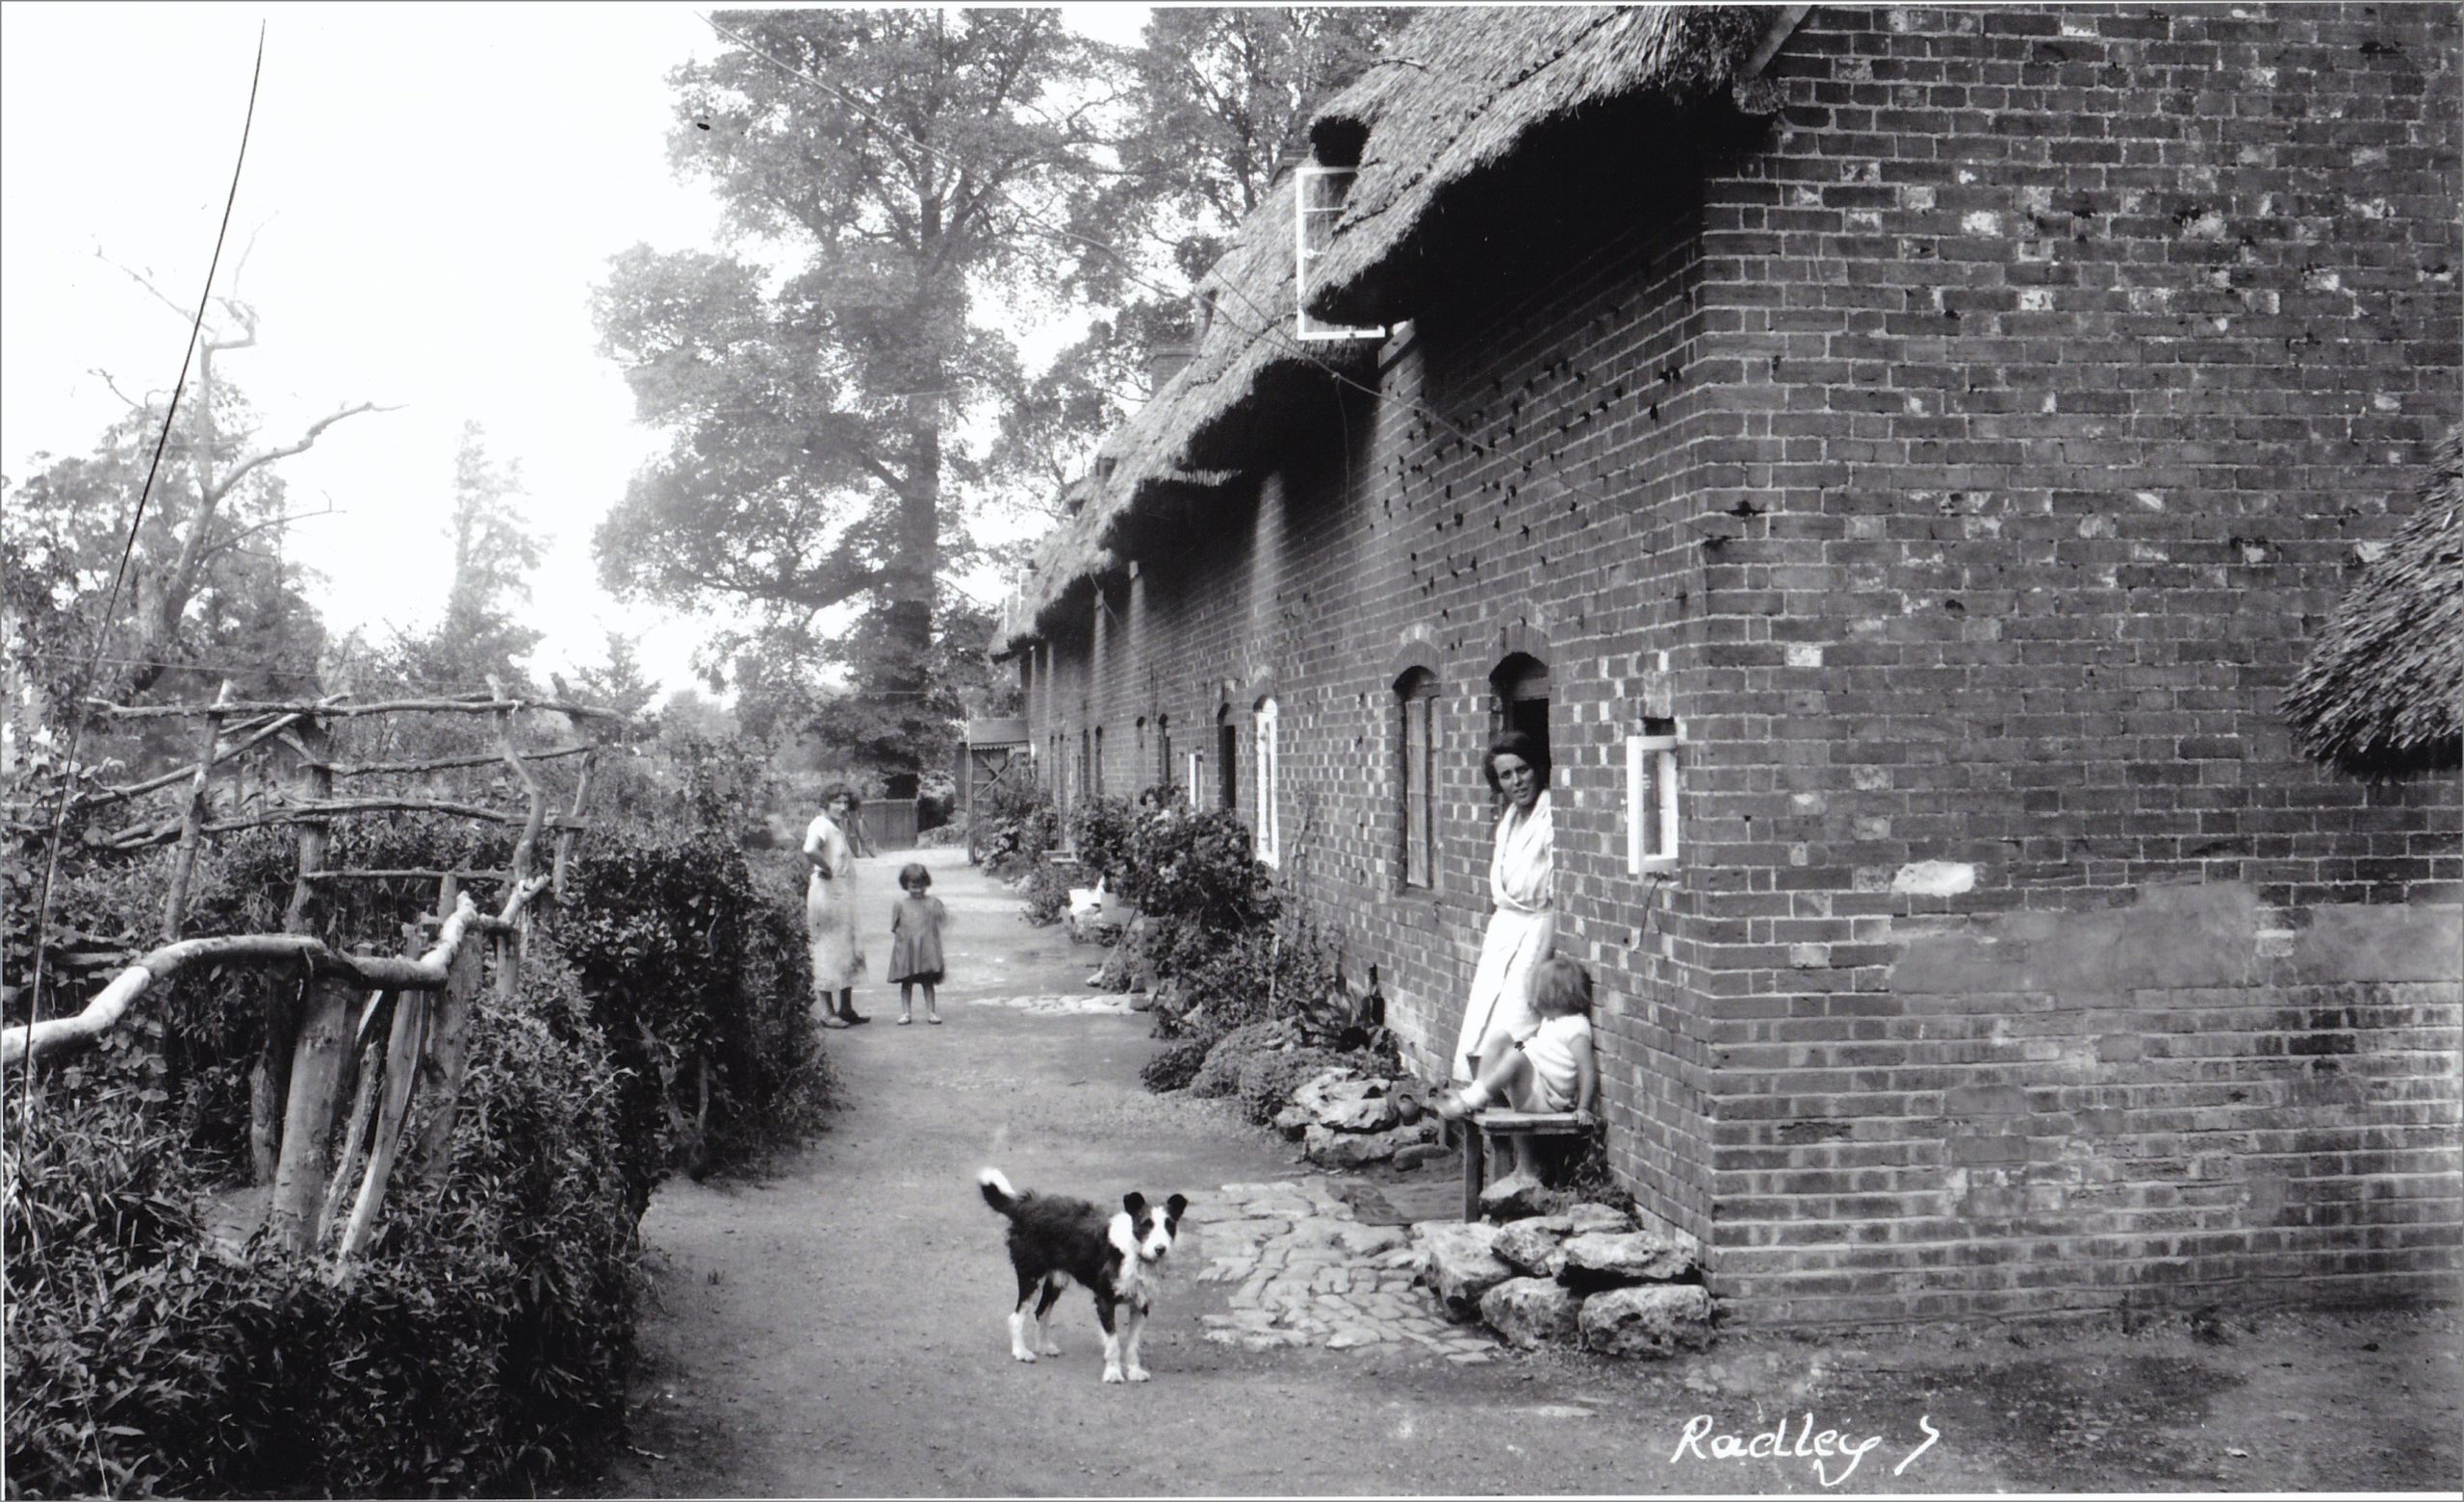 Rose Cottage Terrace in Radley, pictured probably in the 1930s